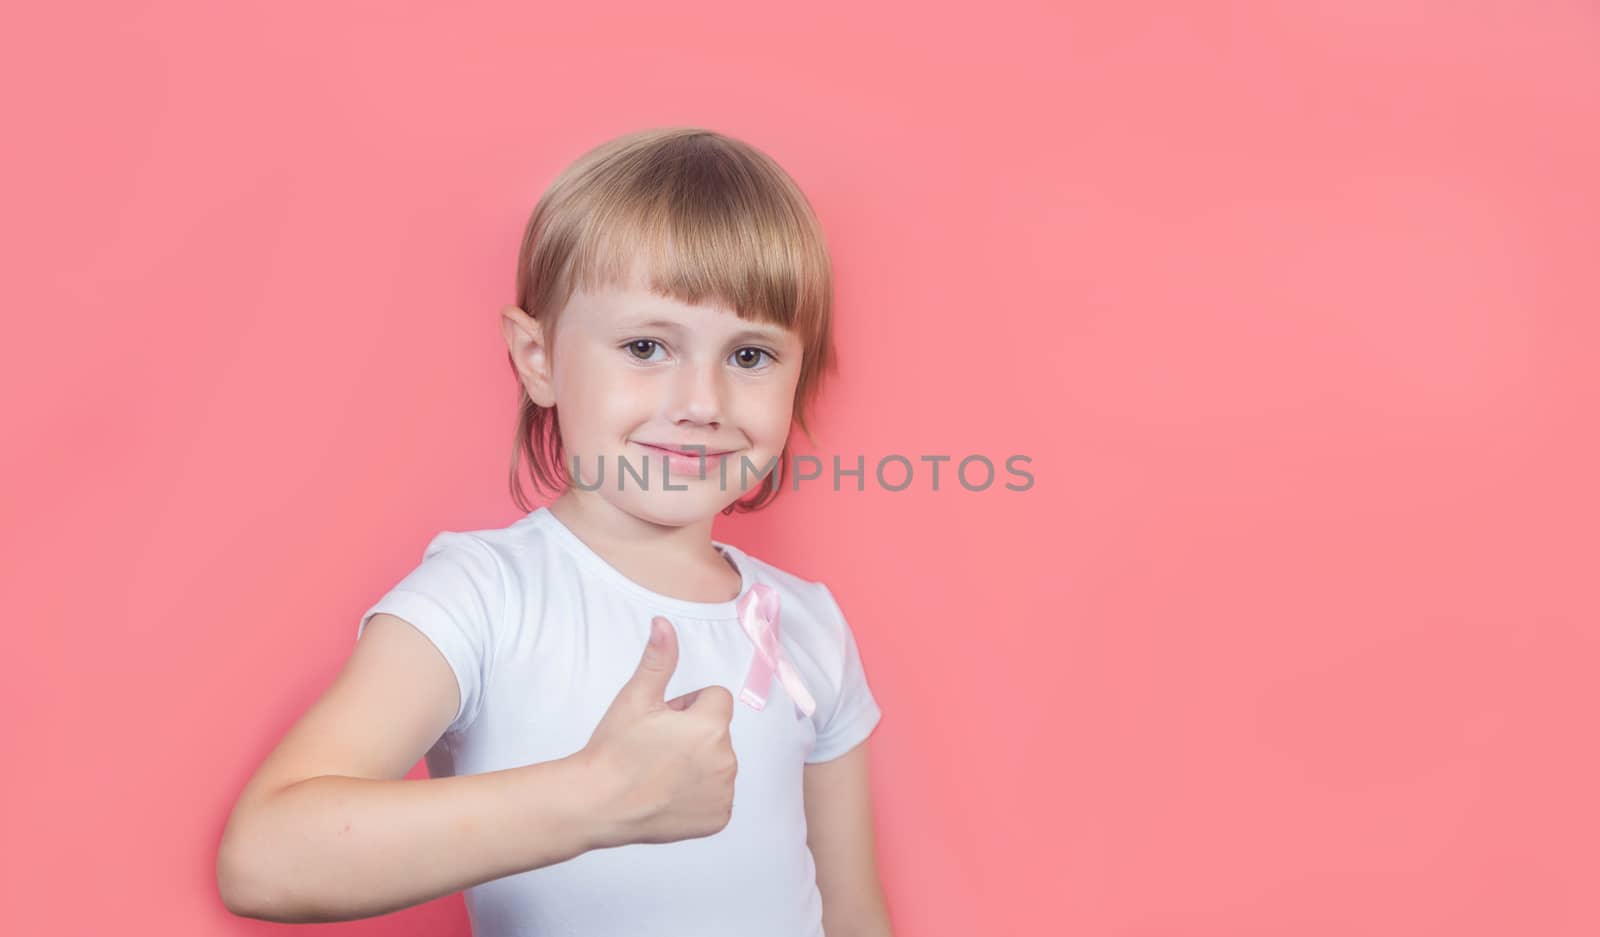 .Little girl showing thumb up wearing white t-shirt and pink breast cancer awareness ribbon